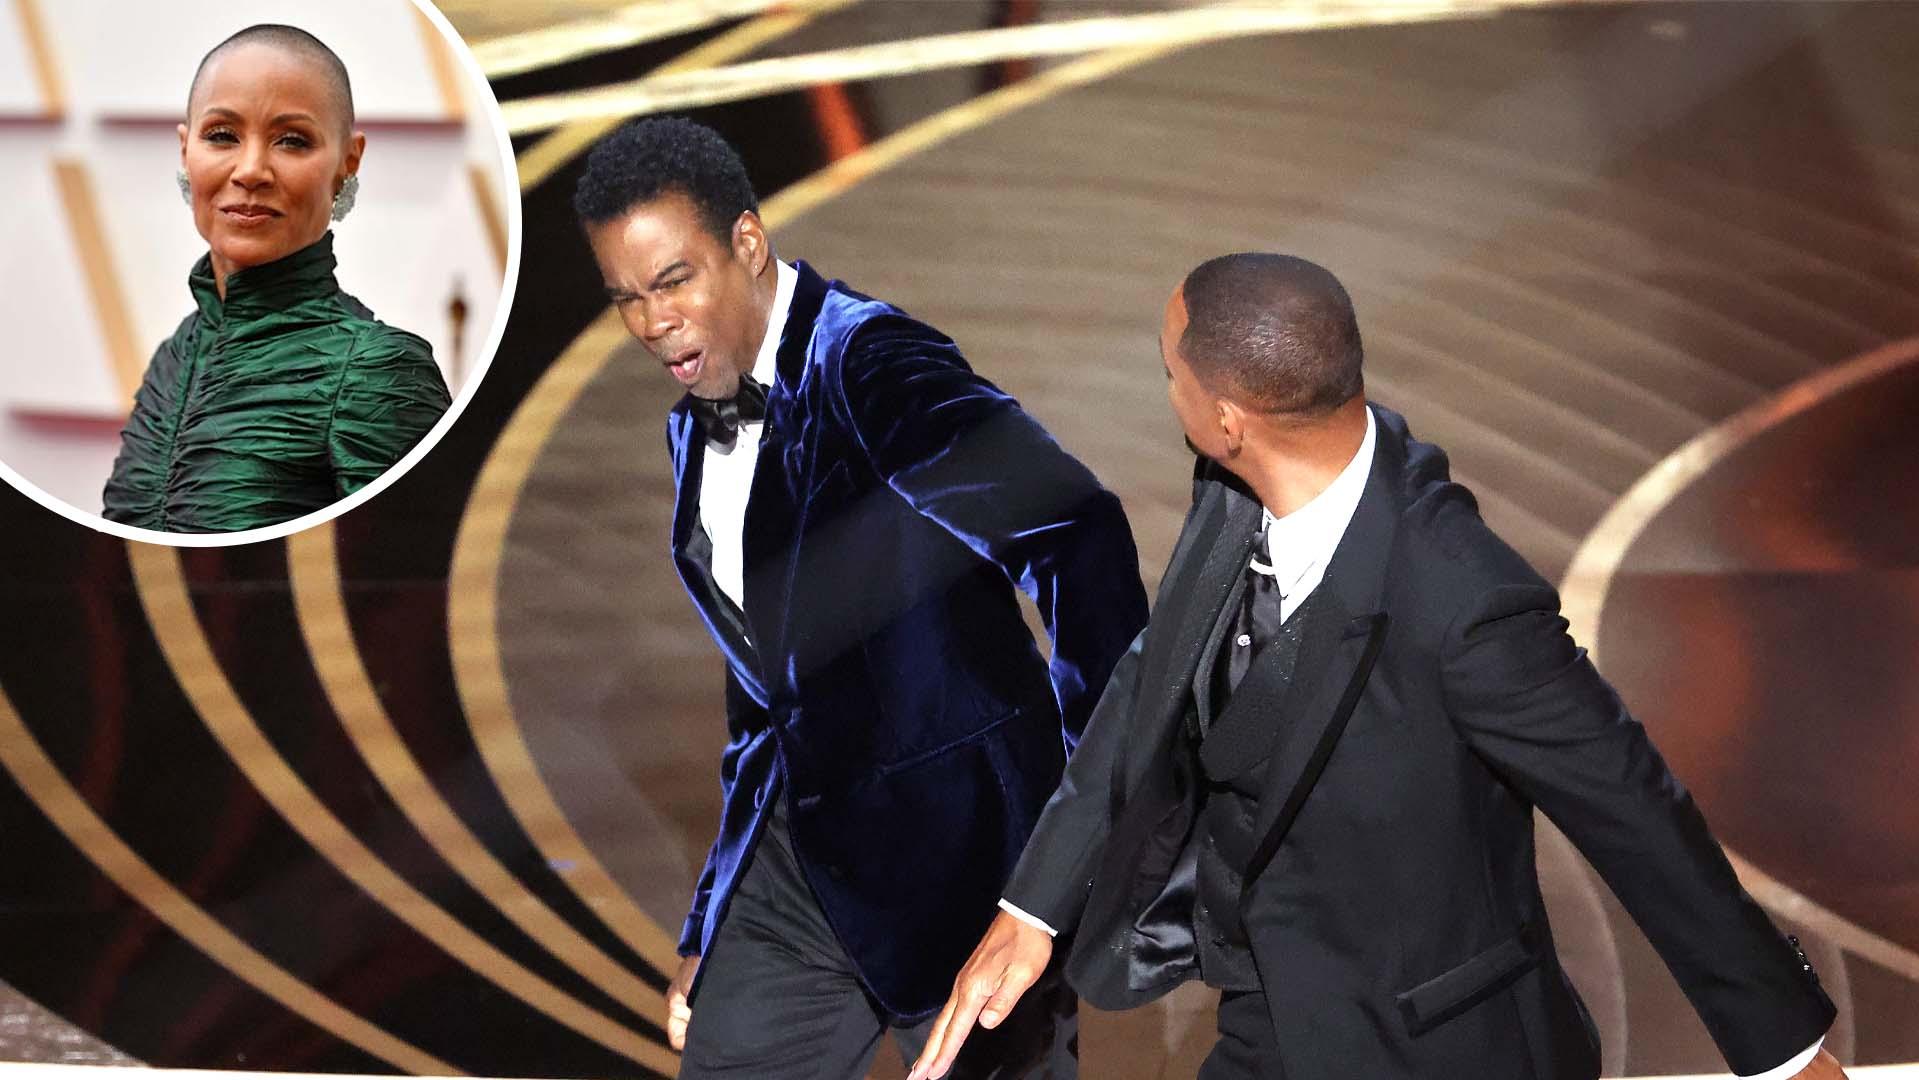 Chris Rock Gets Clocked Across The Face By Will Smith At The Oscars!